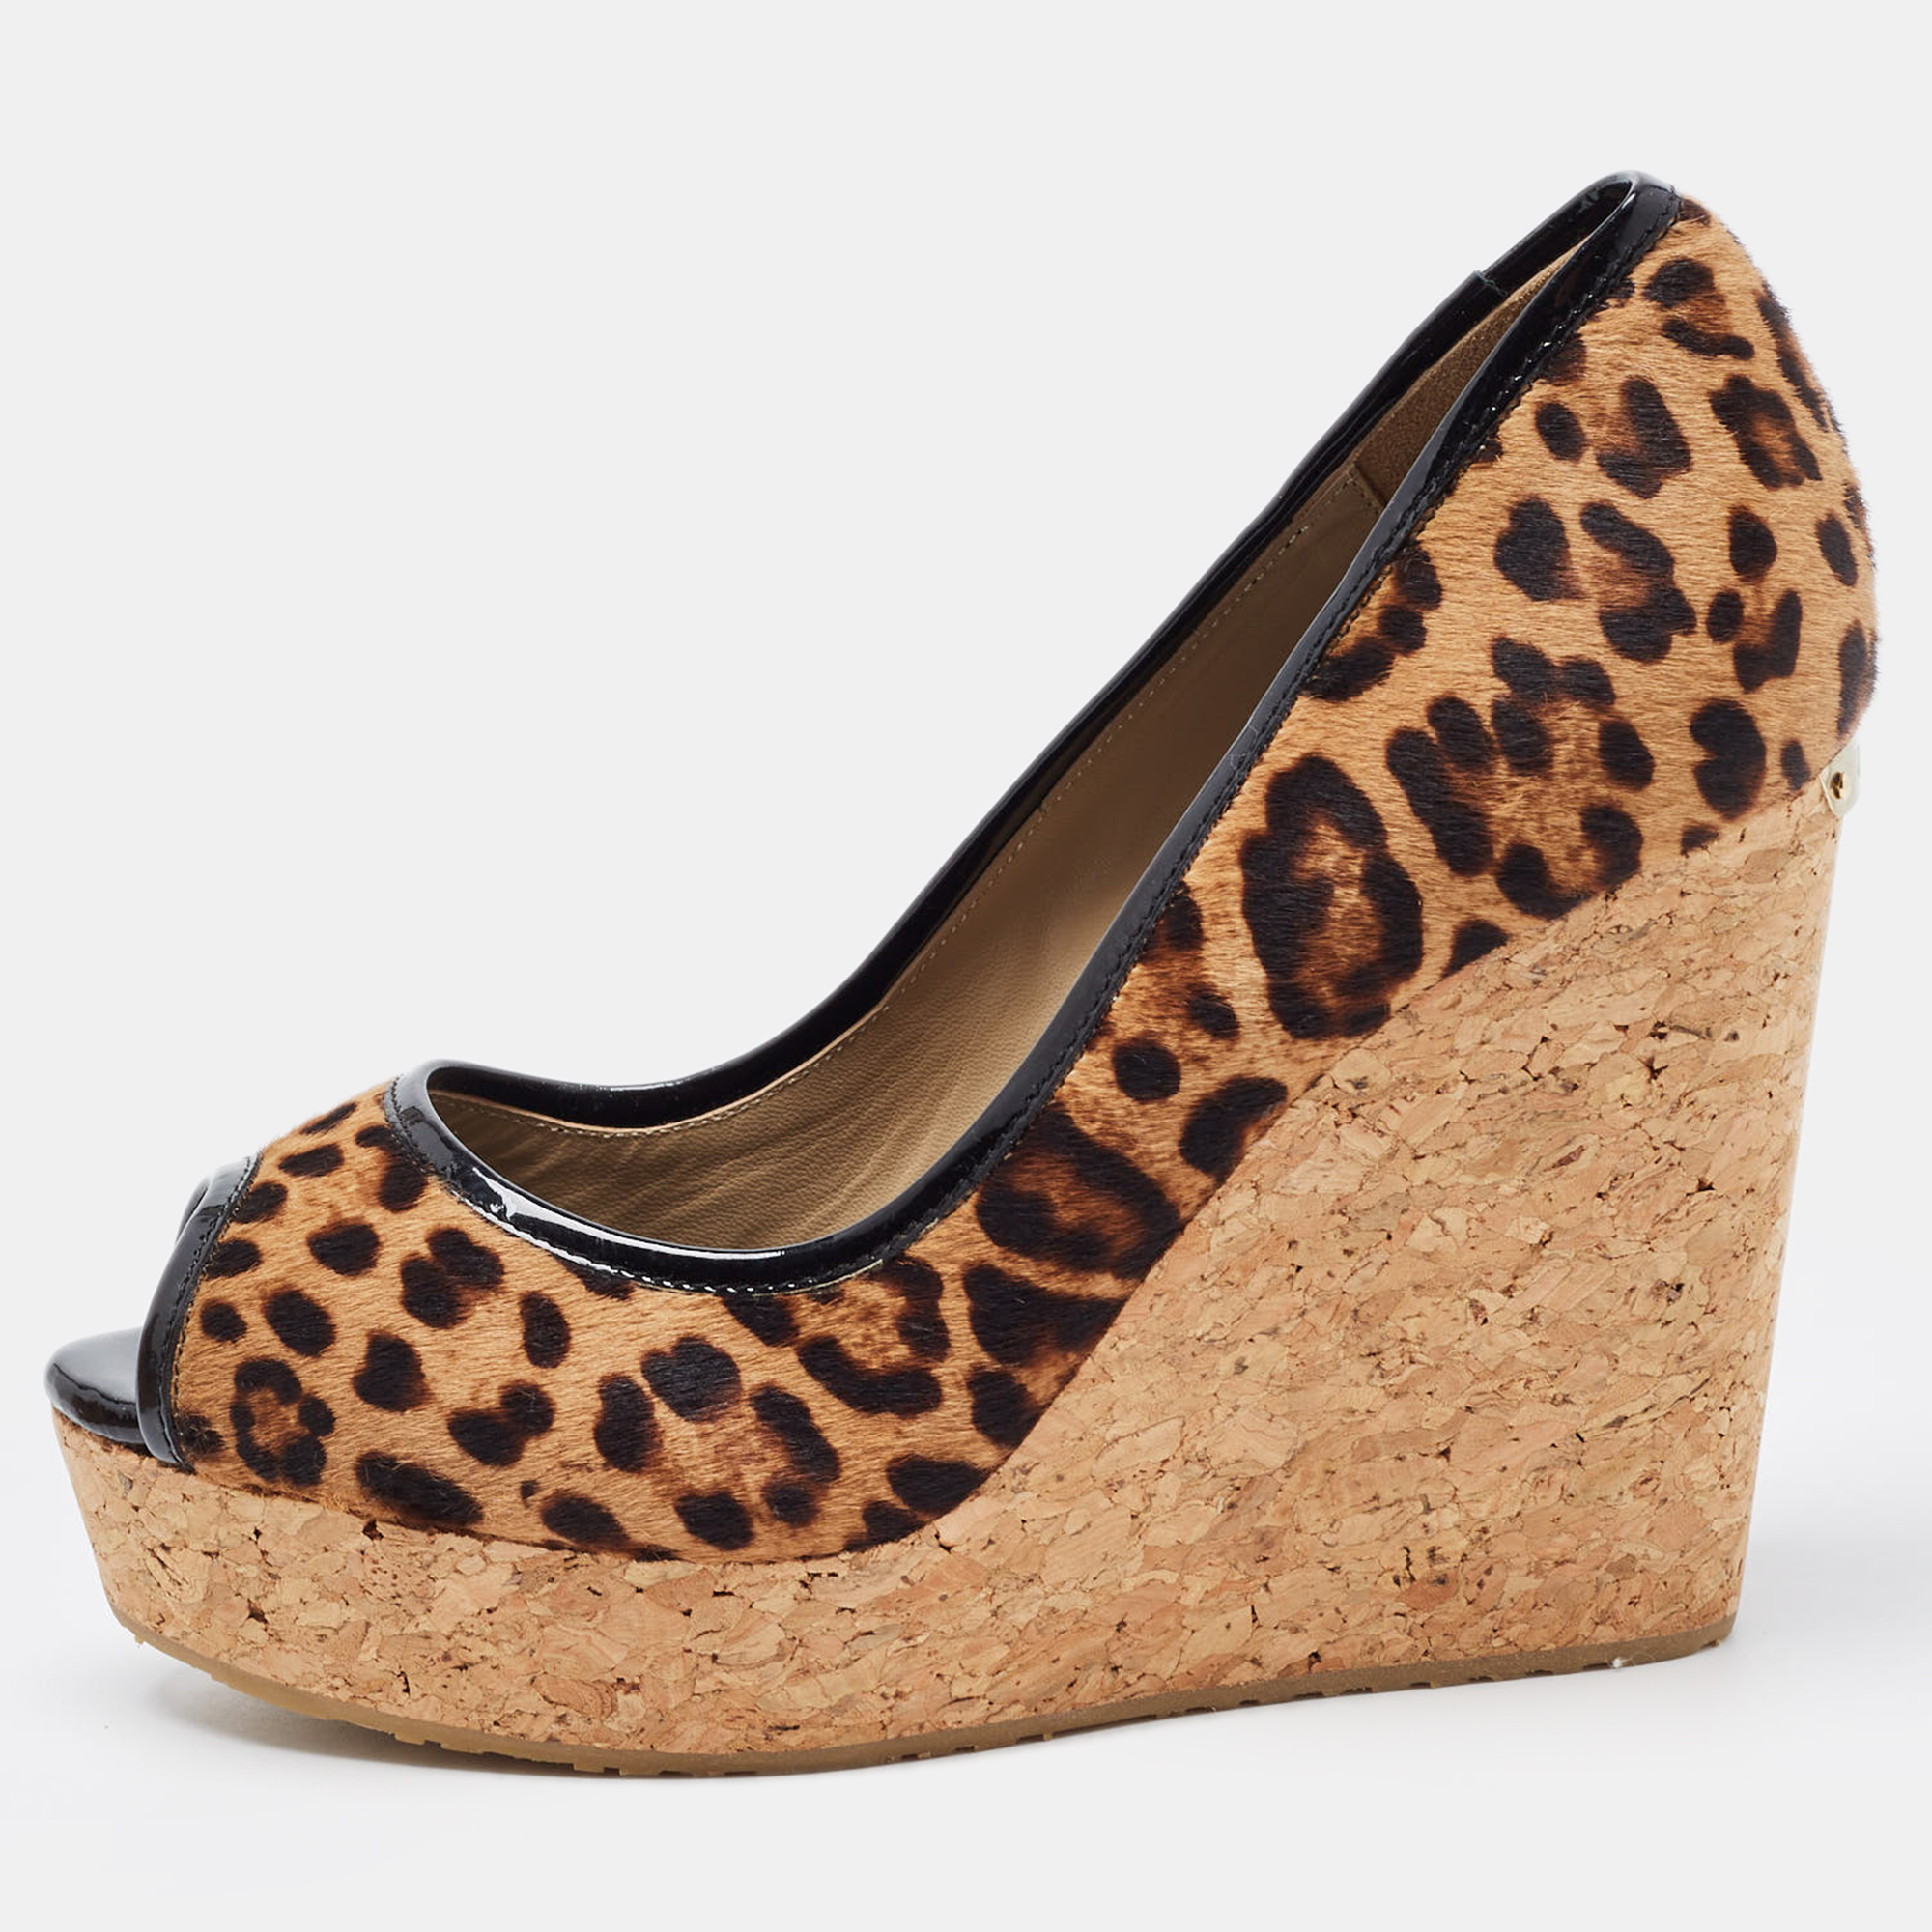 Jimmy choo brown/beige leopard print calf hair and patent leather papina trim cork wedge platform pumps size 39